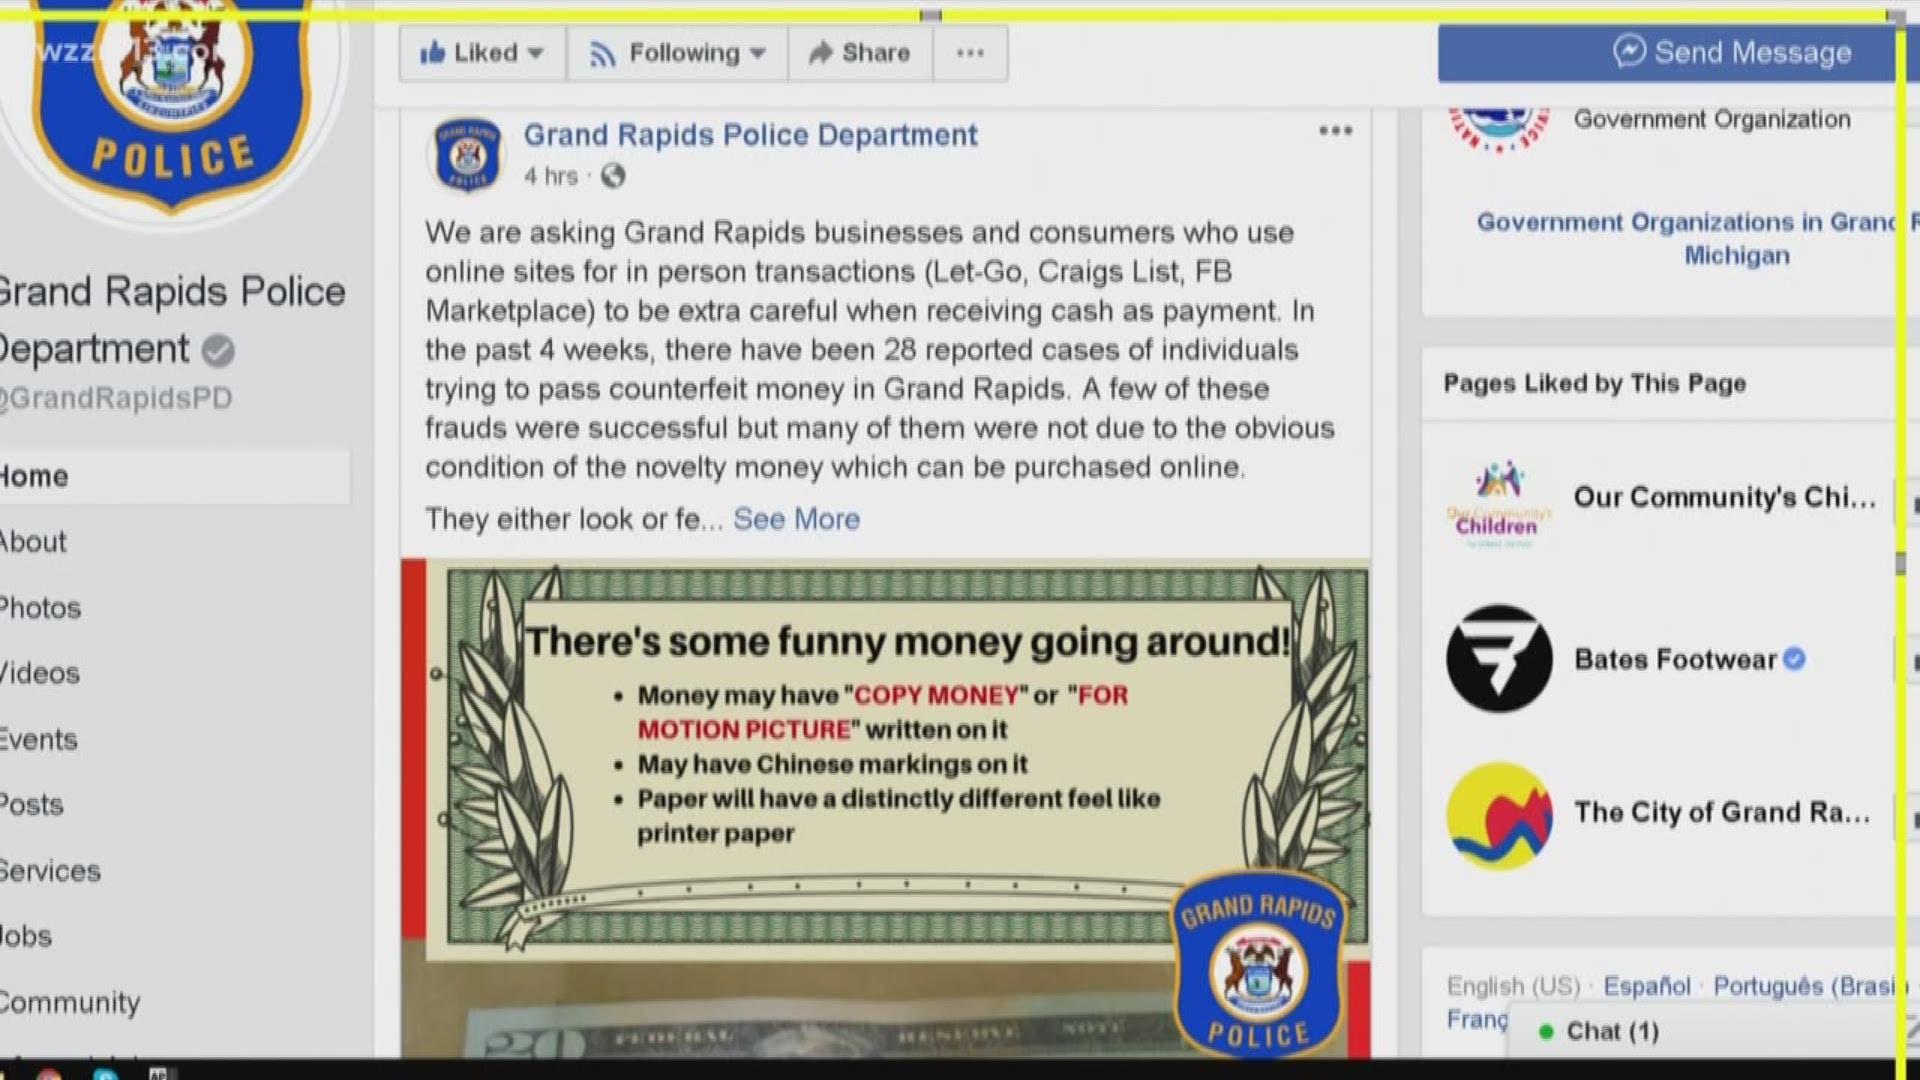 According to Grand Rapids Police, there have been 28 reported cases of individuals trying to pass counterfeit money in Grand Rapids in the last 4 weeks -- a few frauds were successful.